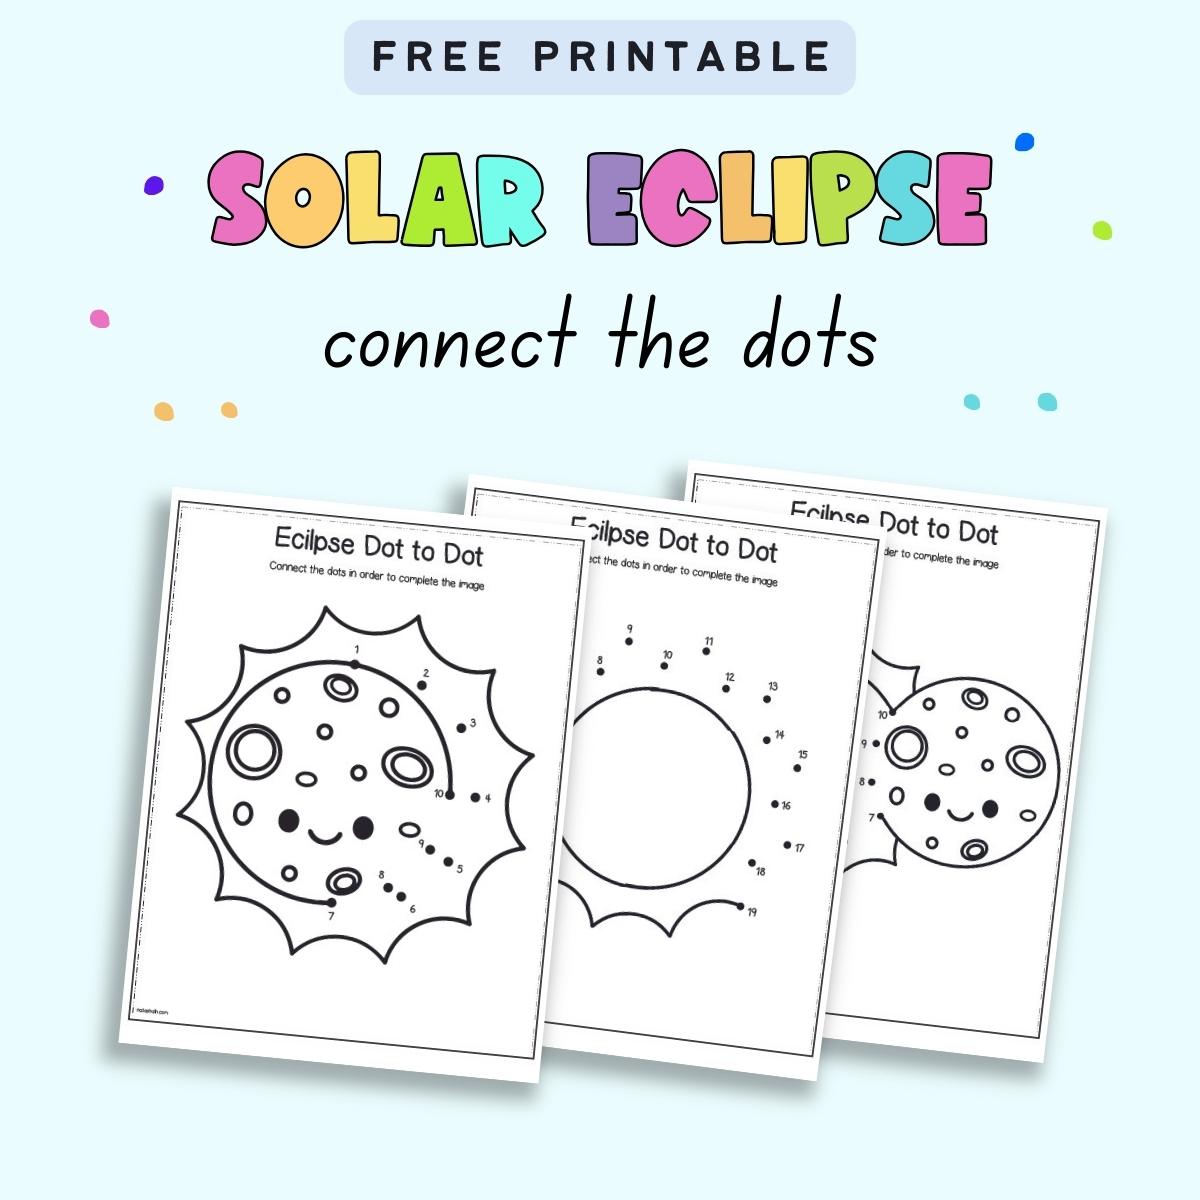 Text "free printable solar eclipse connect the dots" with a  preview of three dot to dots images.